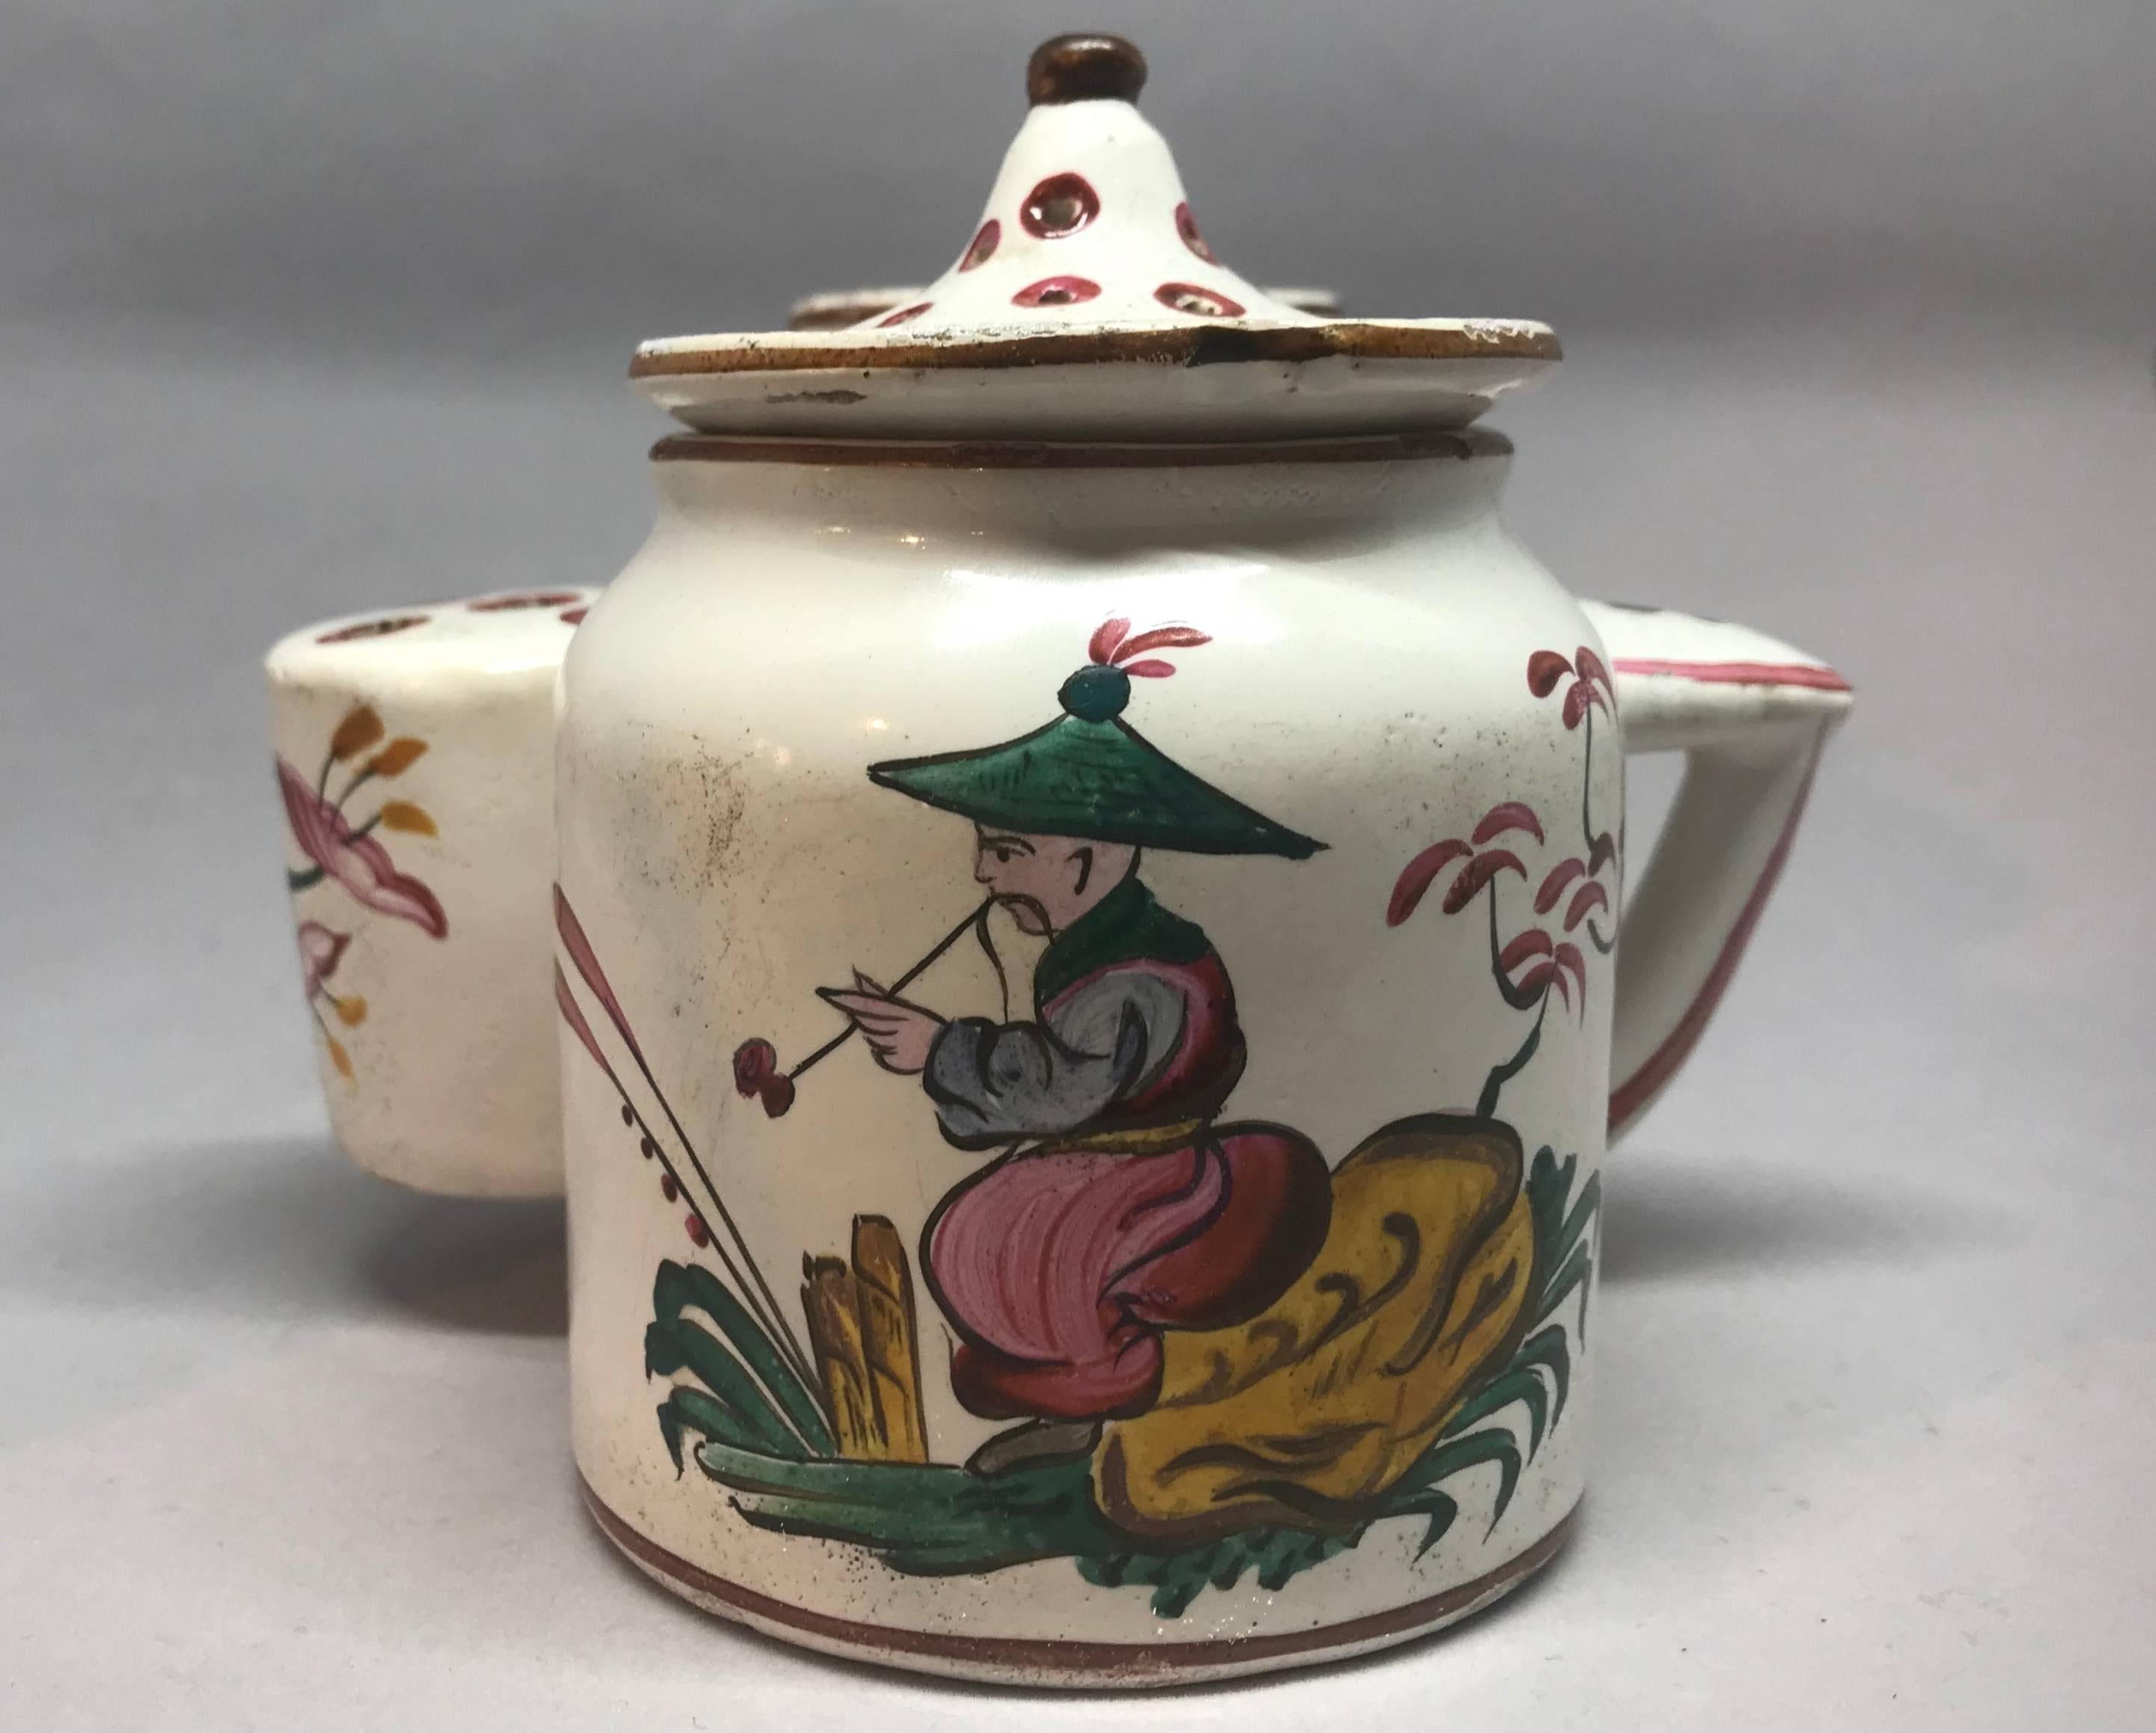 Strasbourg chinoiserie inkwell. Antique double-pot faience handled encrier with quill pot and removeable ink pot and cover and sand pot, both with pagoda-top finials, all painted with chinoiserie figures and floral sprays. France, late 18th century.